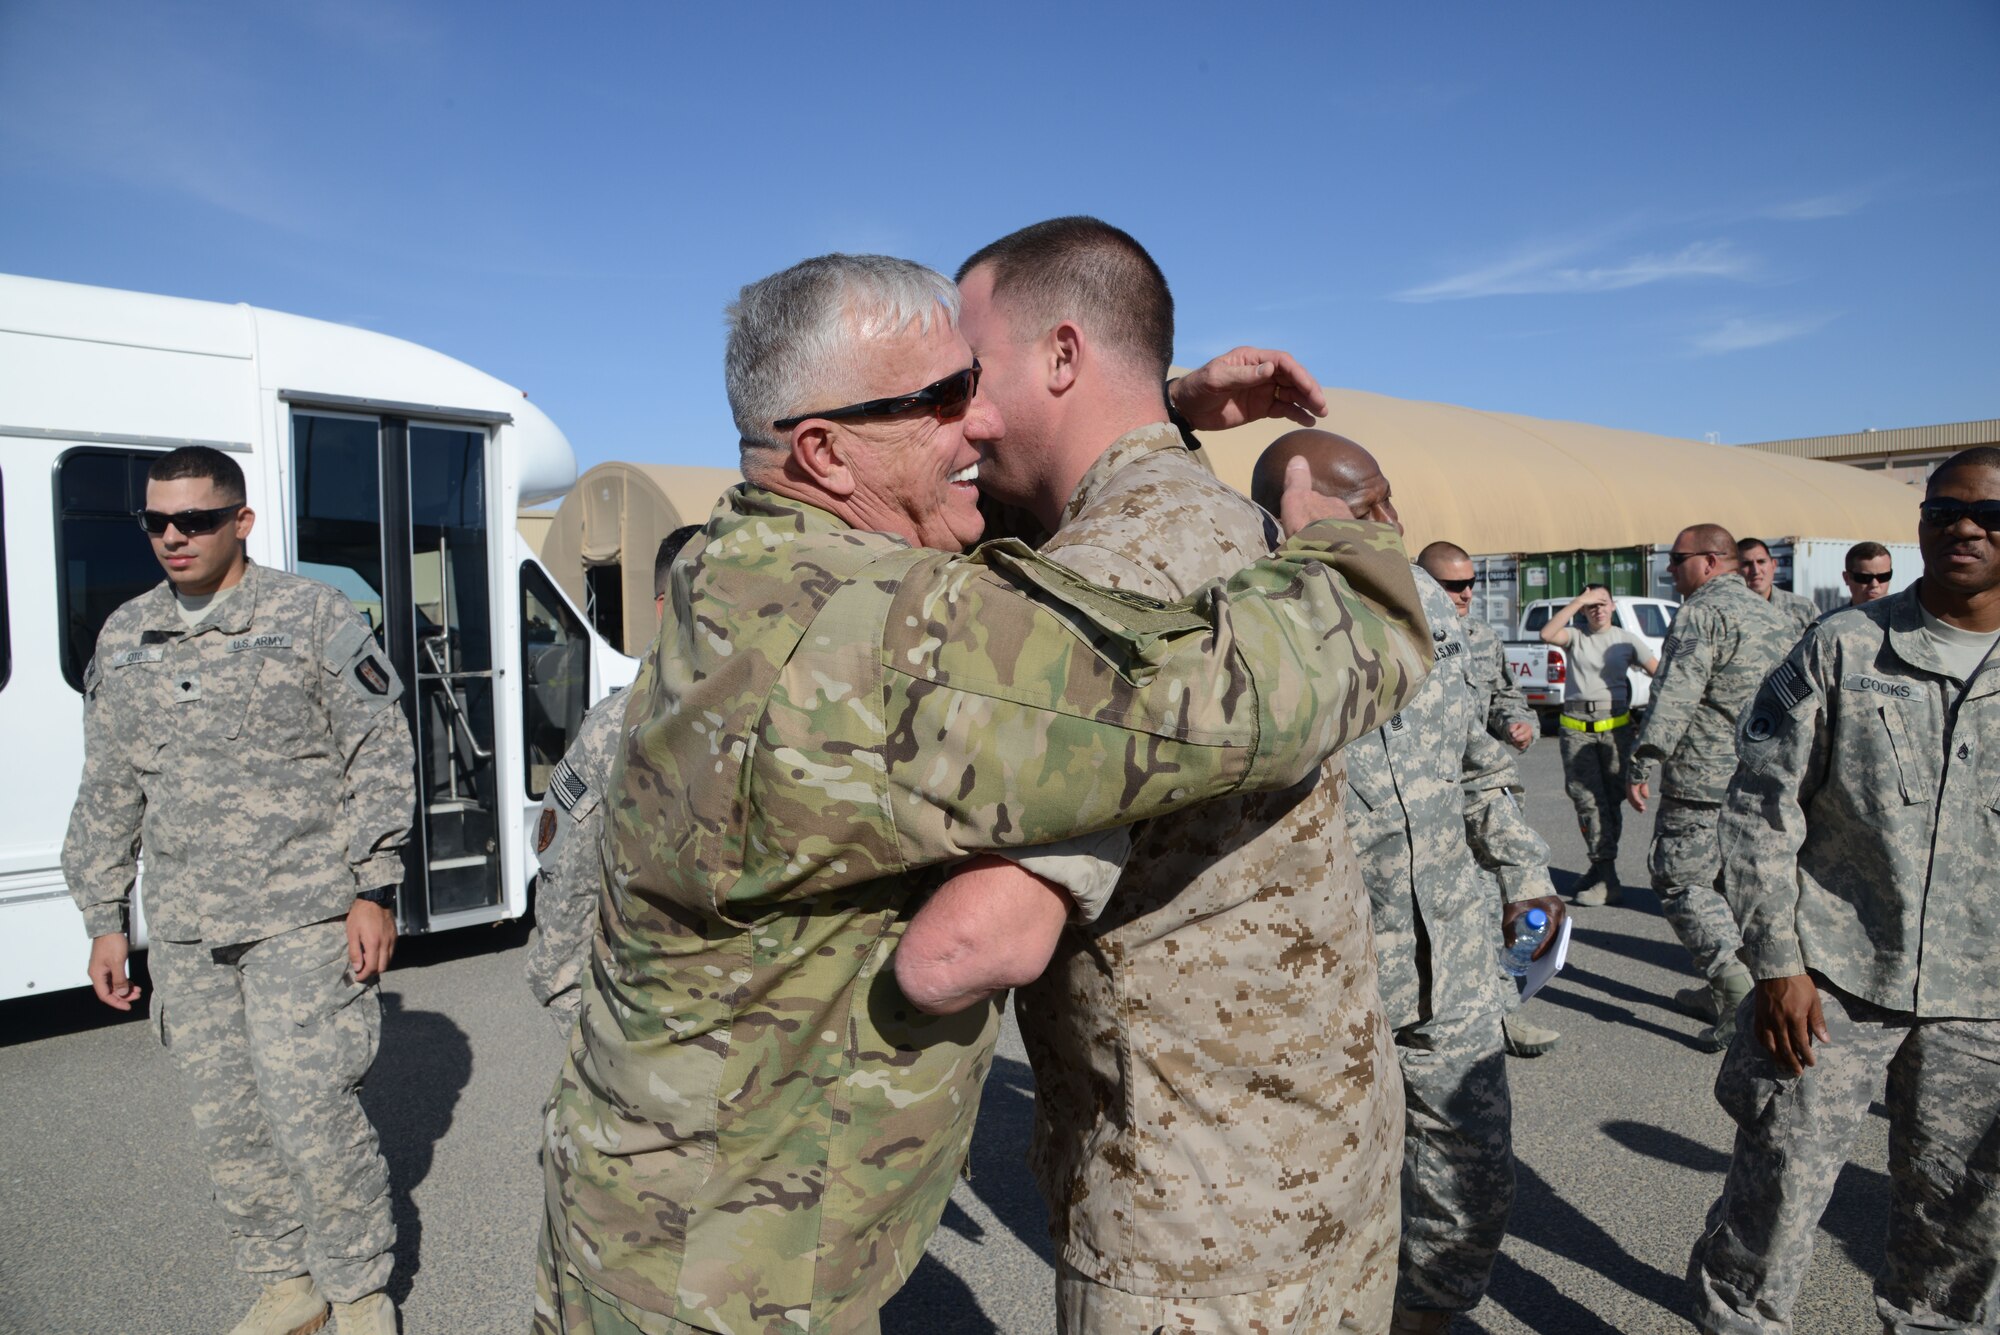 A Wounded Warrior hugs an Operation Proper Exit volunteer during a  return here from Afghanistan on Nov. 2, 2014. Operation Proper Exit, part of the Troops First Foundation, provides the opportunity for wounded warriors to return to the battle space, share their experiences – both good and bad – and most importantly, leave the theater on their own terms. (U.S. Air Force photo by Tech. Sgt. Jared Marquis)